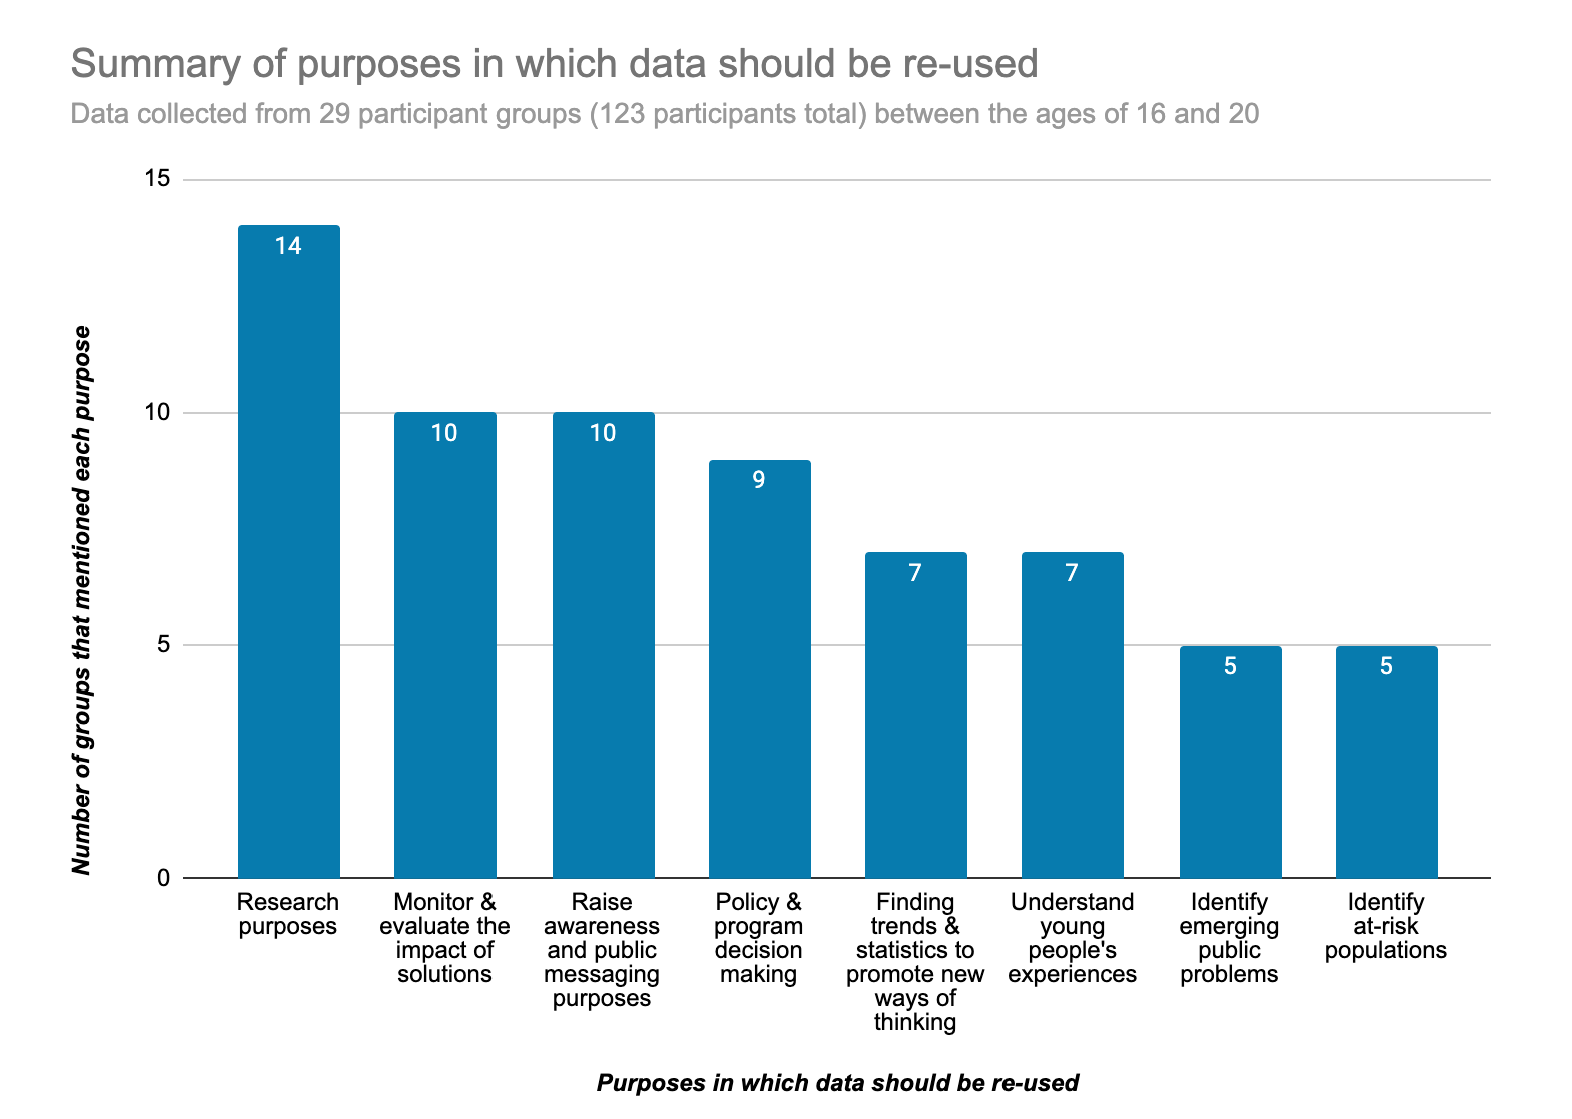 Bar chart showing summary of purposes in which data should be re-used: research; monitoring and evaluating the impact of solutions; raising awareness and pubilc messaging; policy program and decision making; finding trends and statistics to promote new ways of working; understanding young people's experiences; identifying emerging public problems; identifying at-risk populations